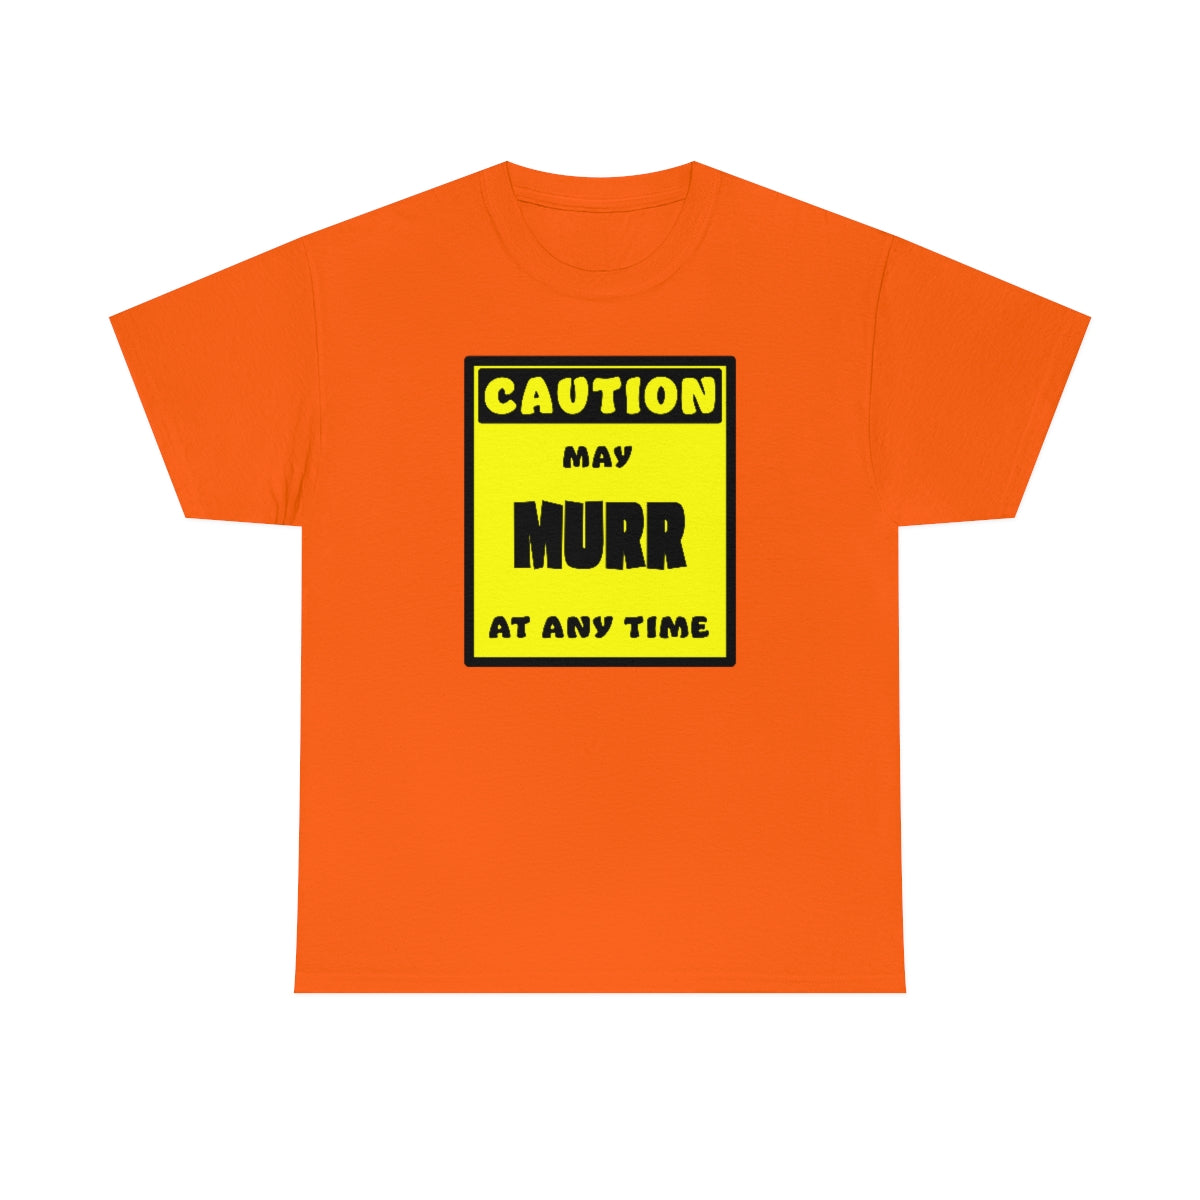 CAUTION! May MURR at any time! - T-Shirt T-Shirt AFLT-Whootorca Orange S 